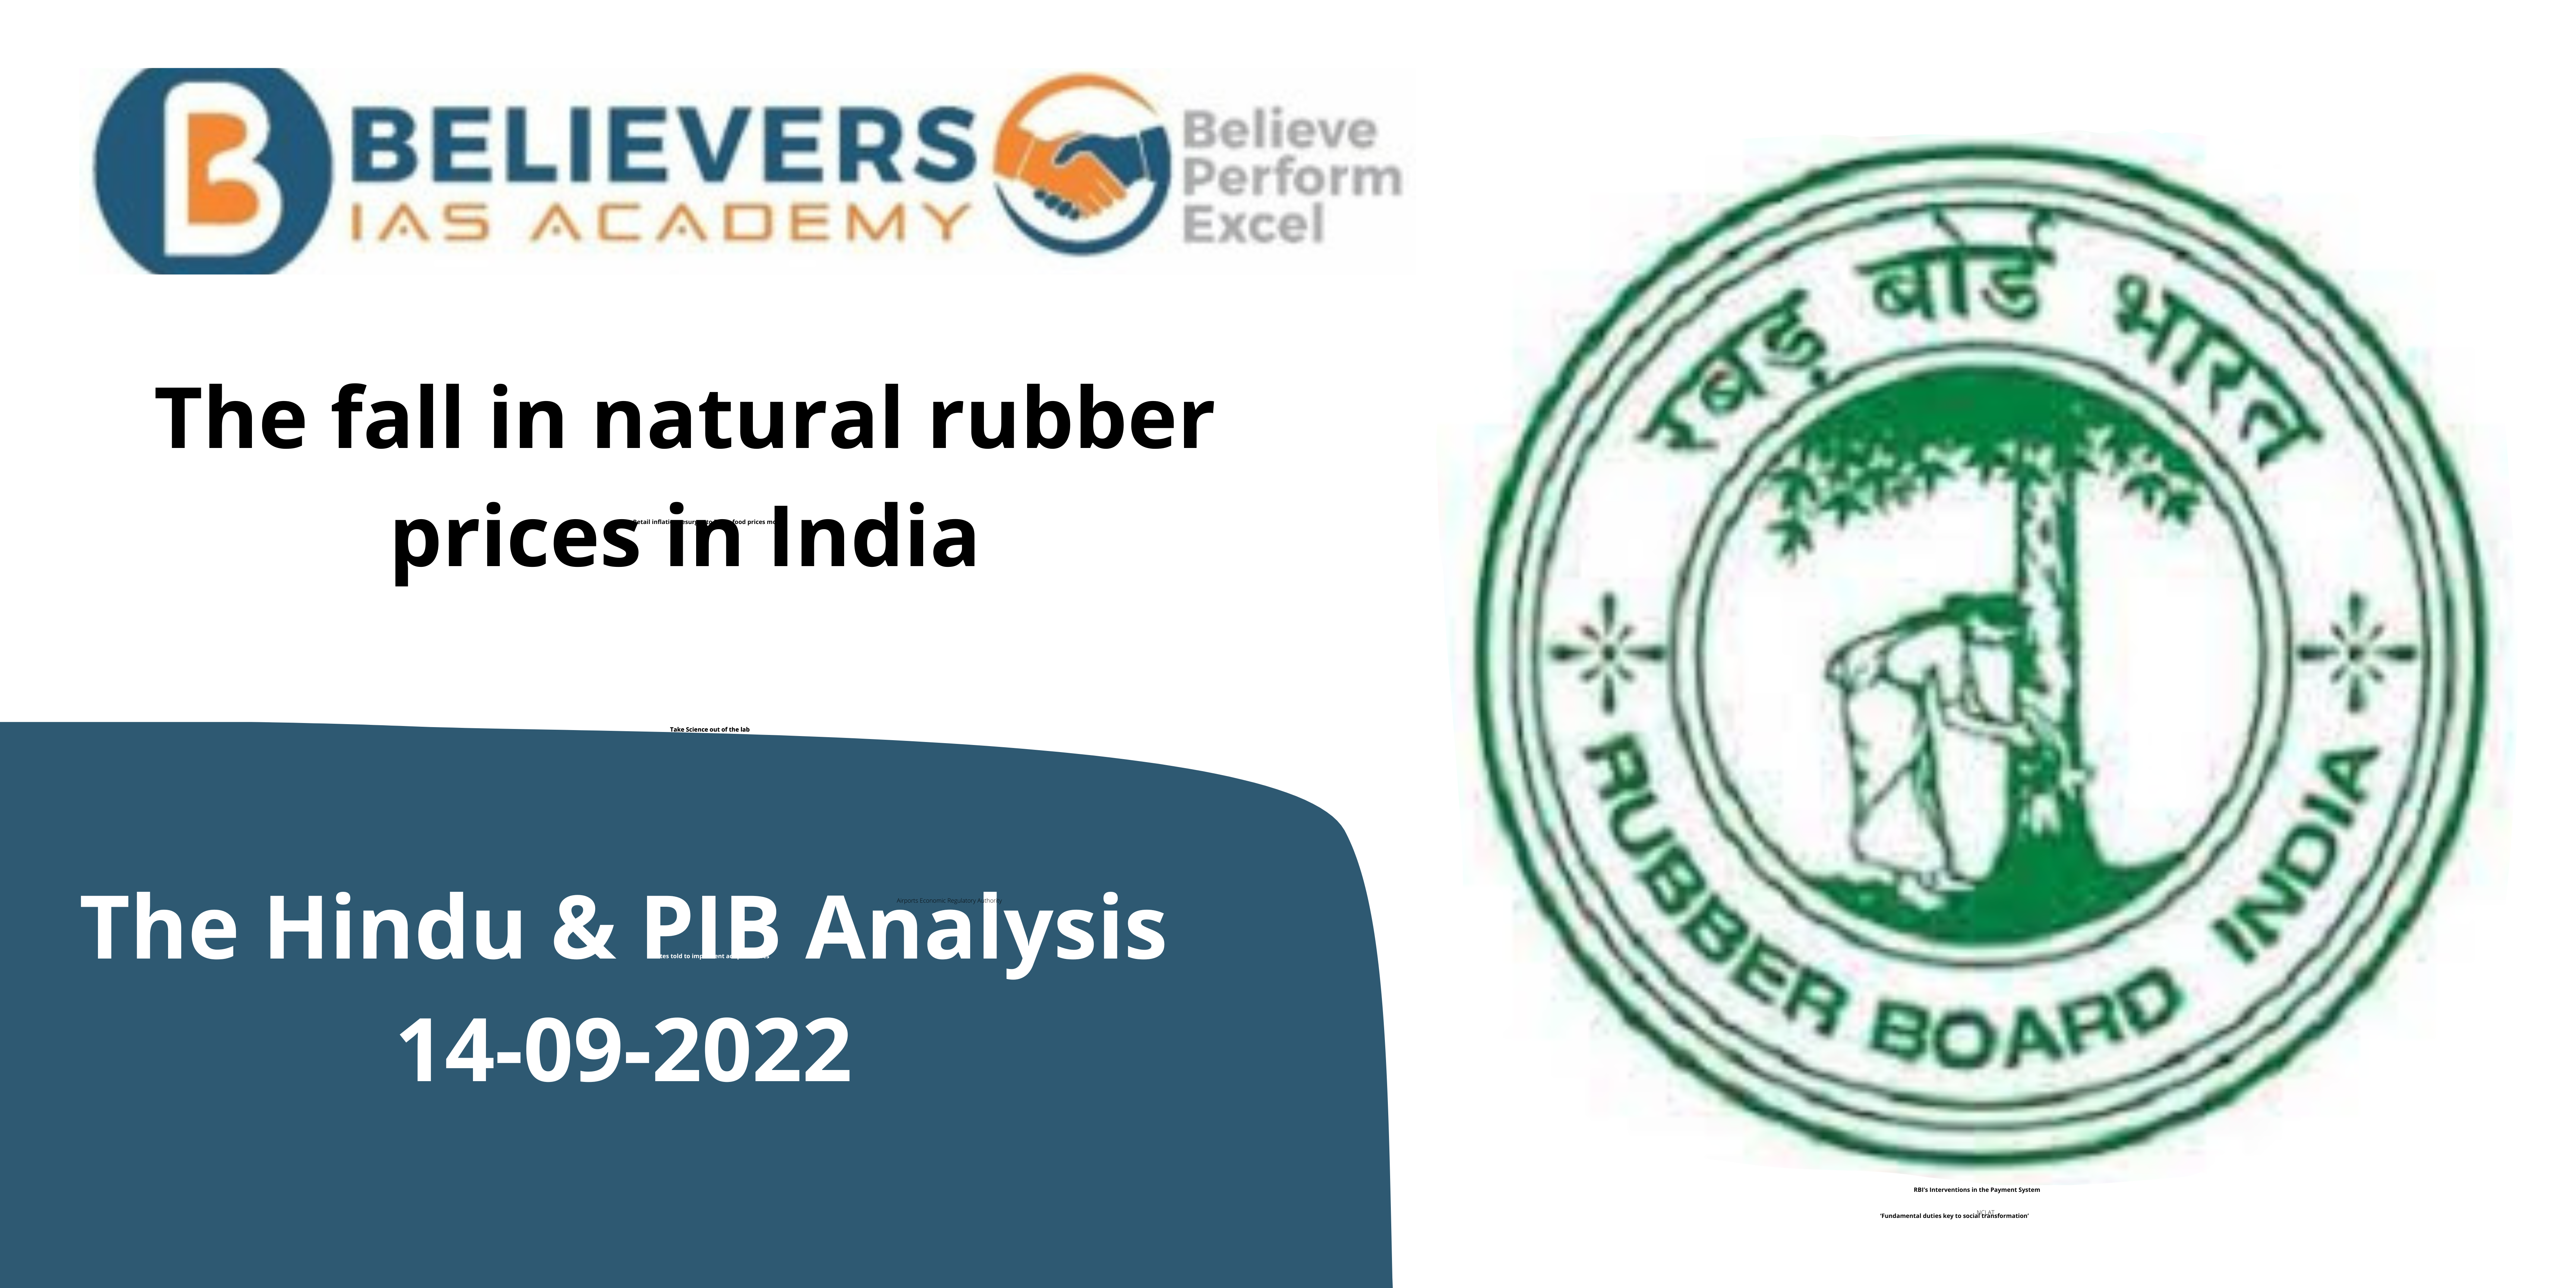 The fall in natural rubber prices in India